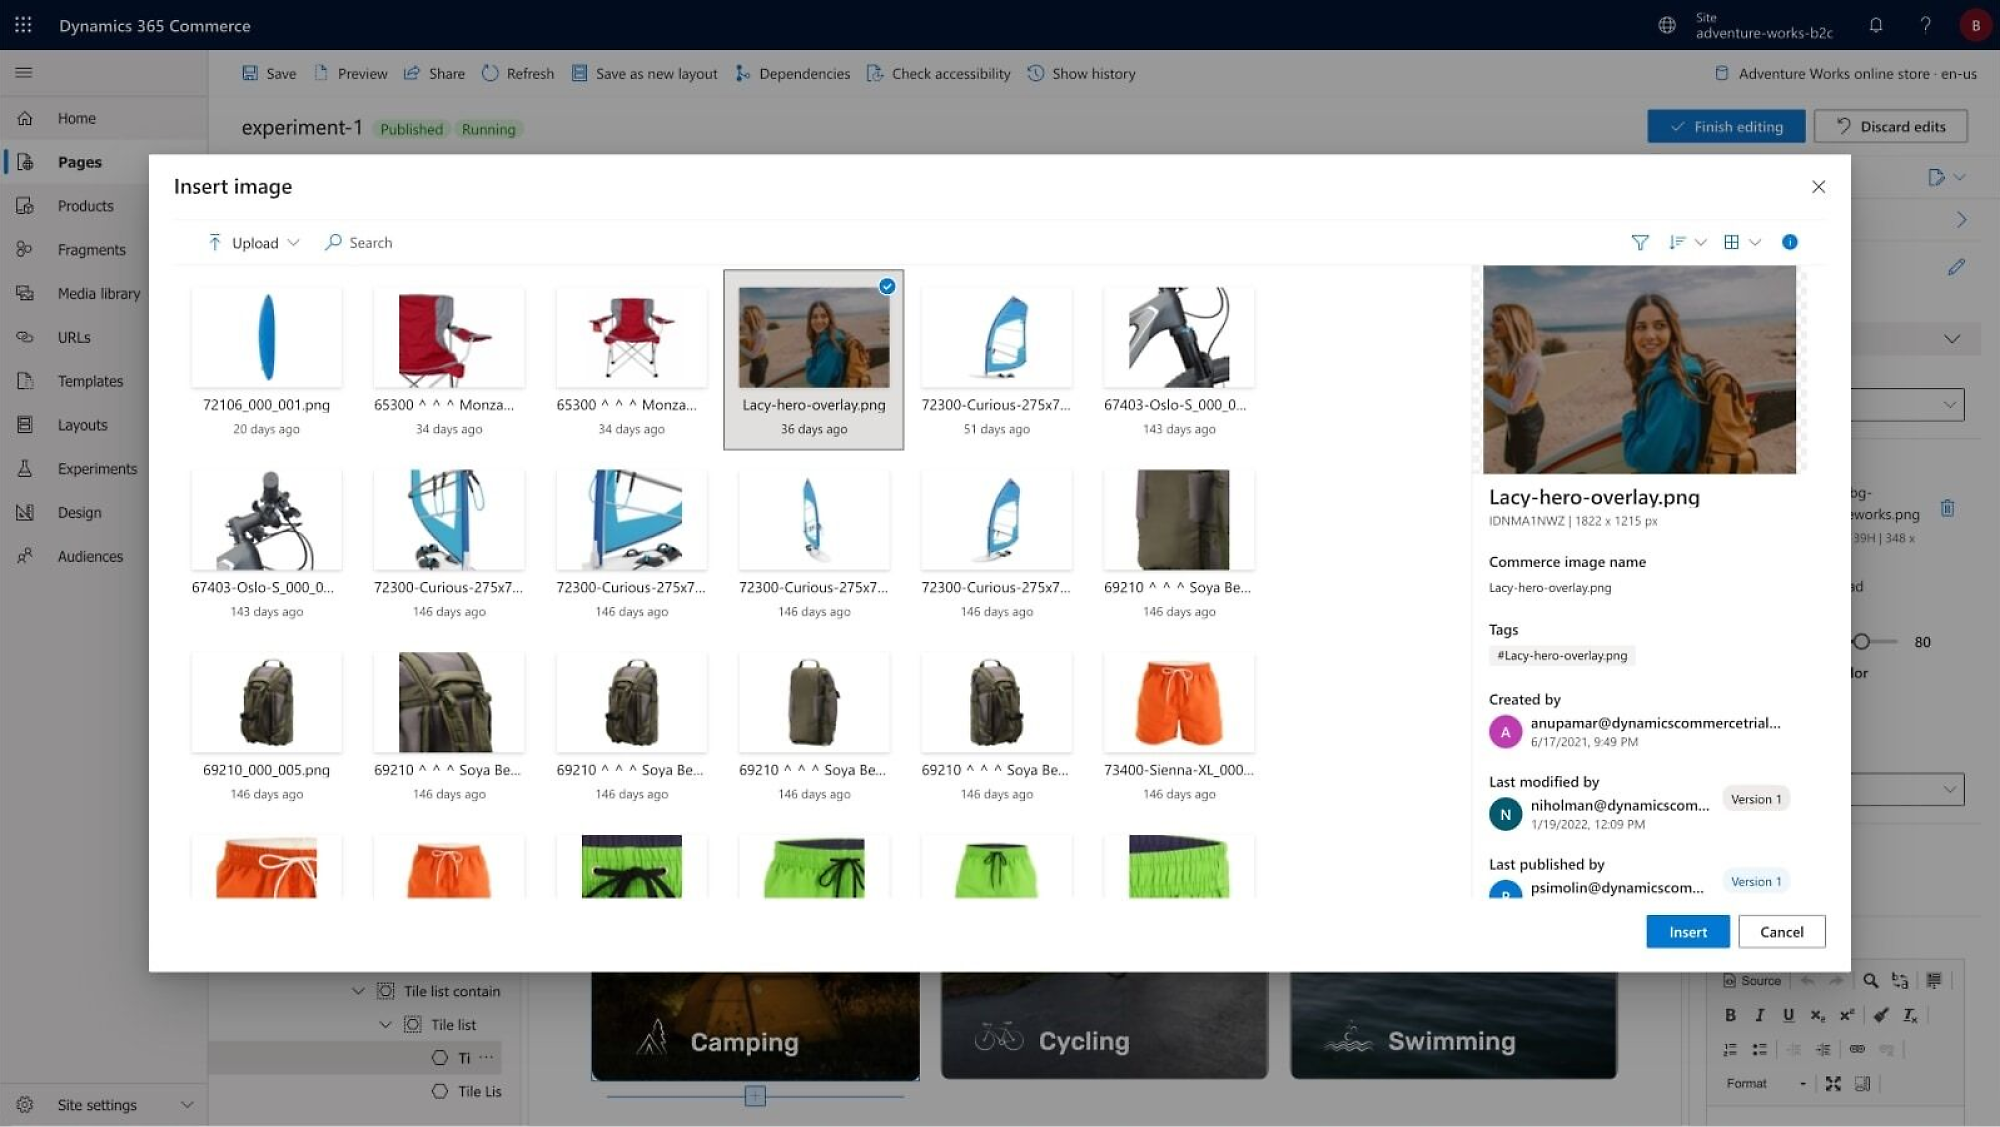 An interface displaying various options and settings for Dynamics 365 Commerce.